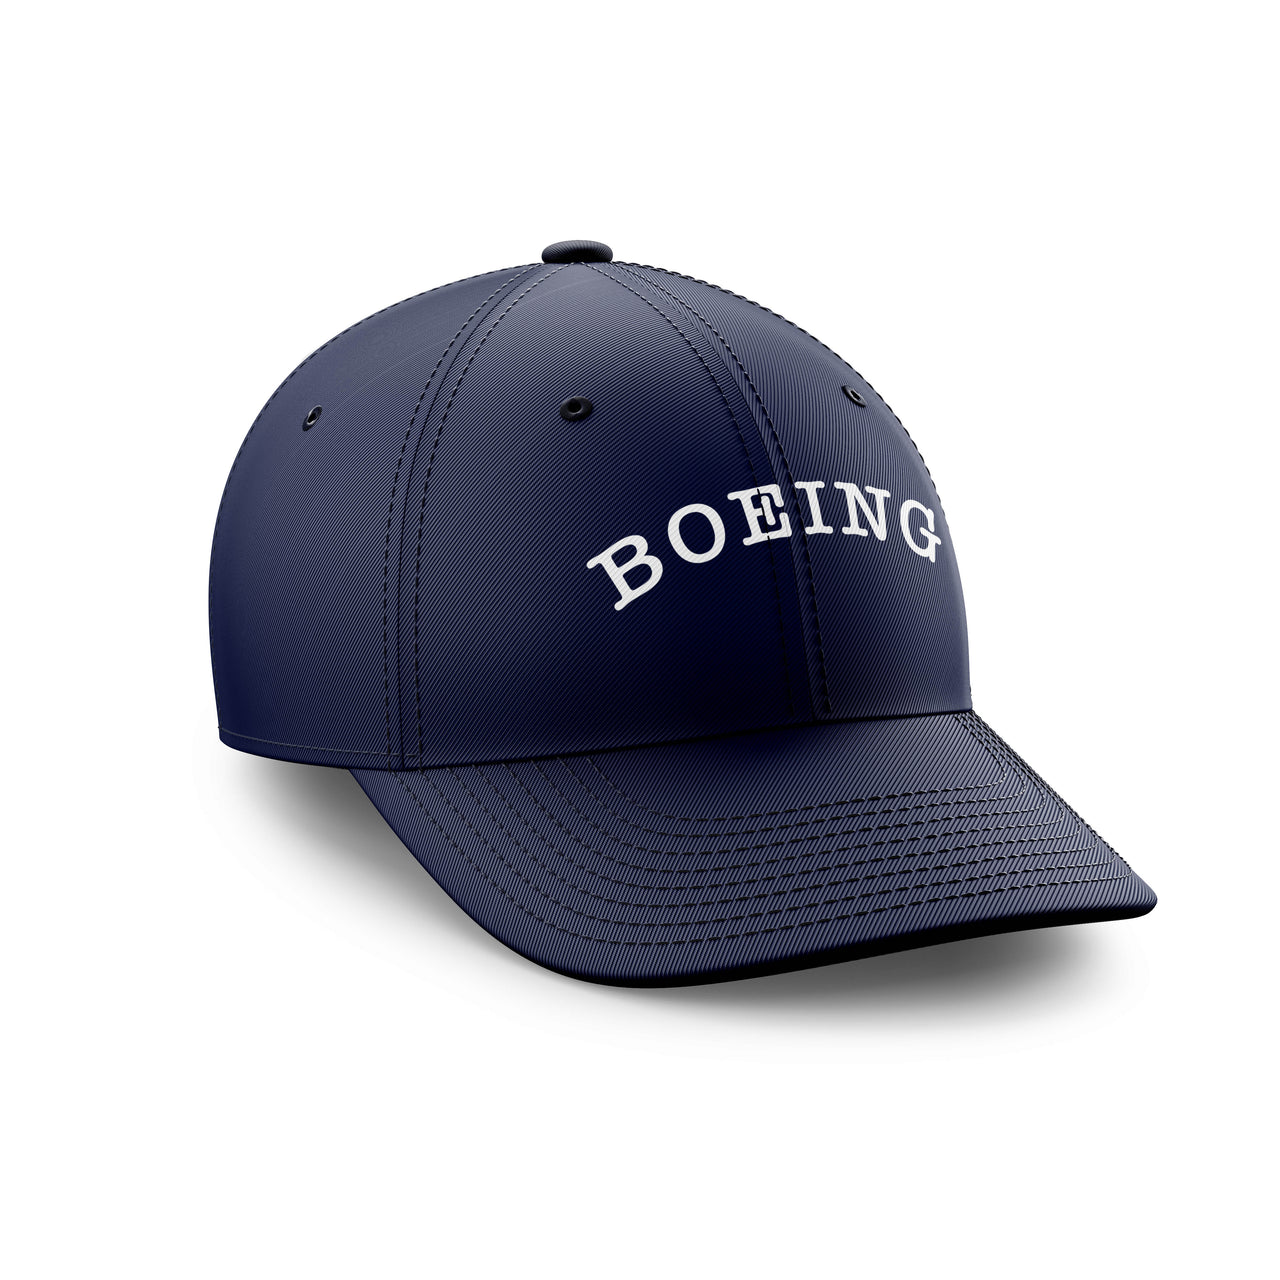 Special Boeing Text Designed Embroidered Hats